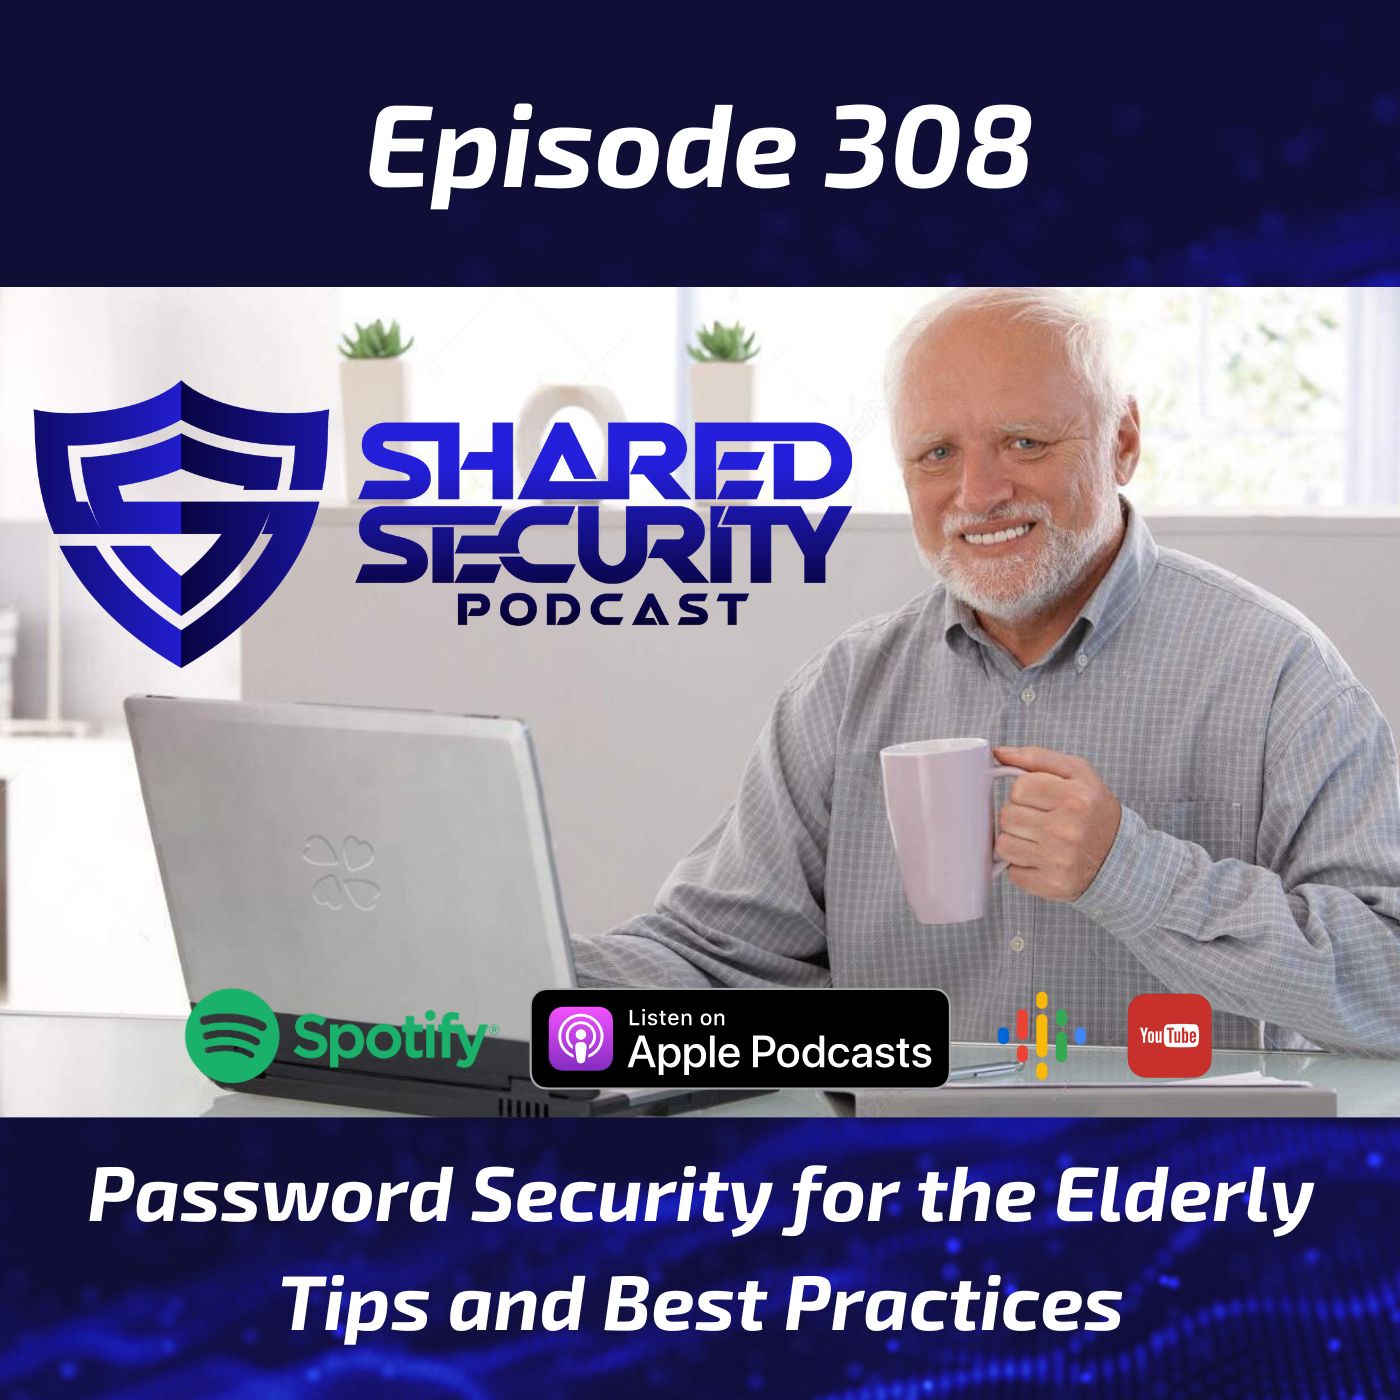 Password Security for the Elderly: Tips and Best Practices